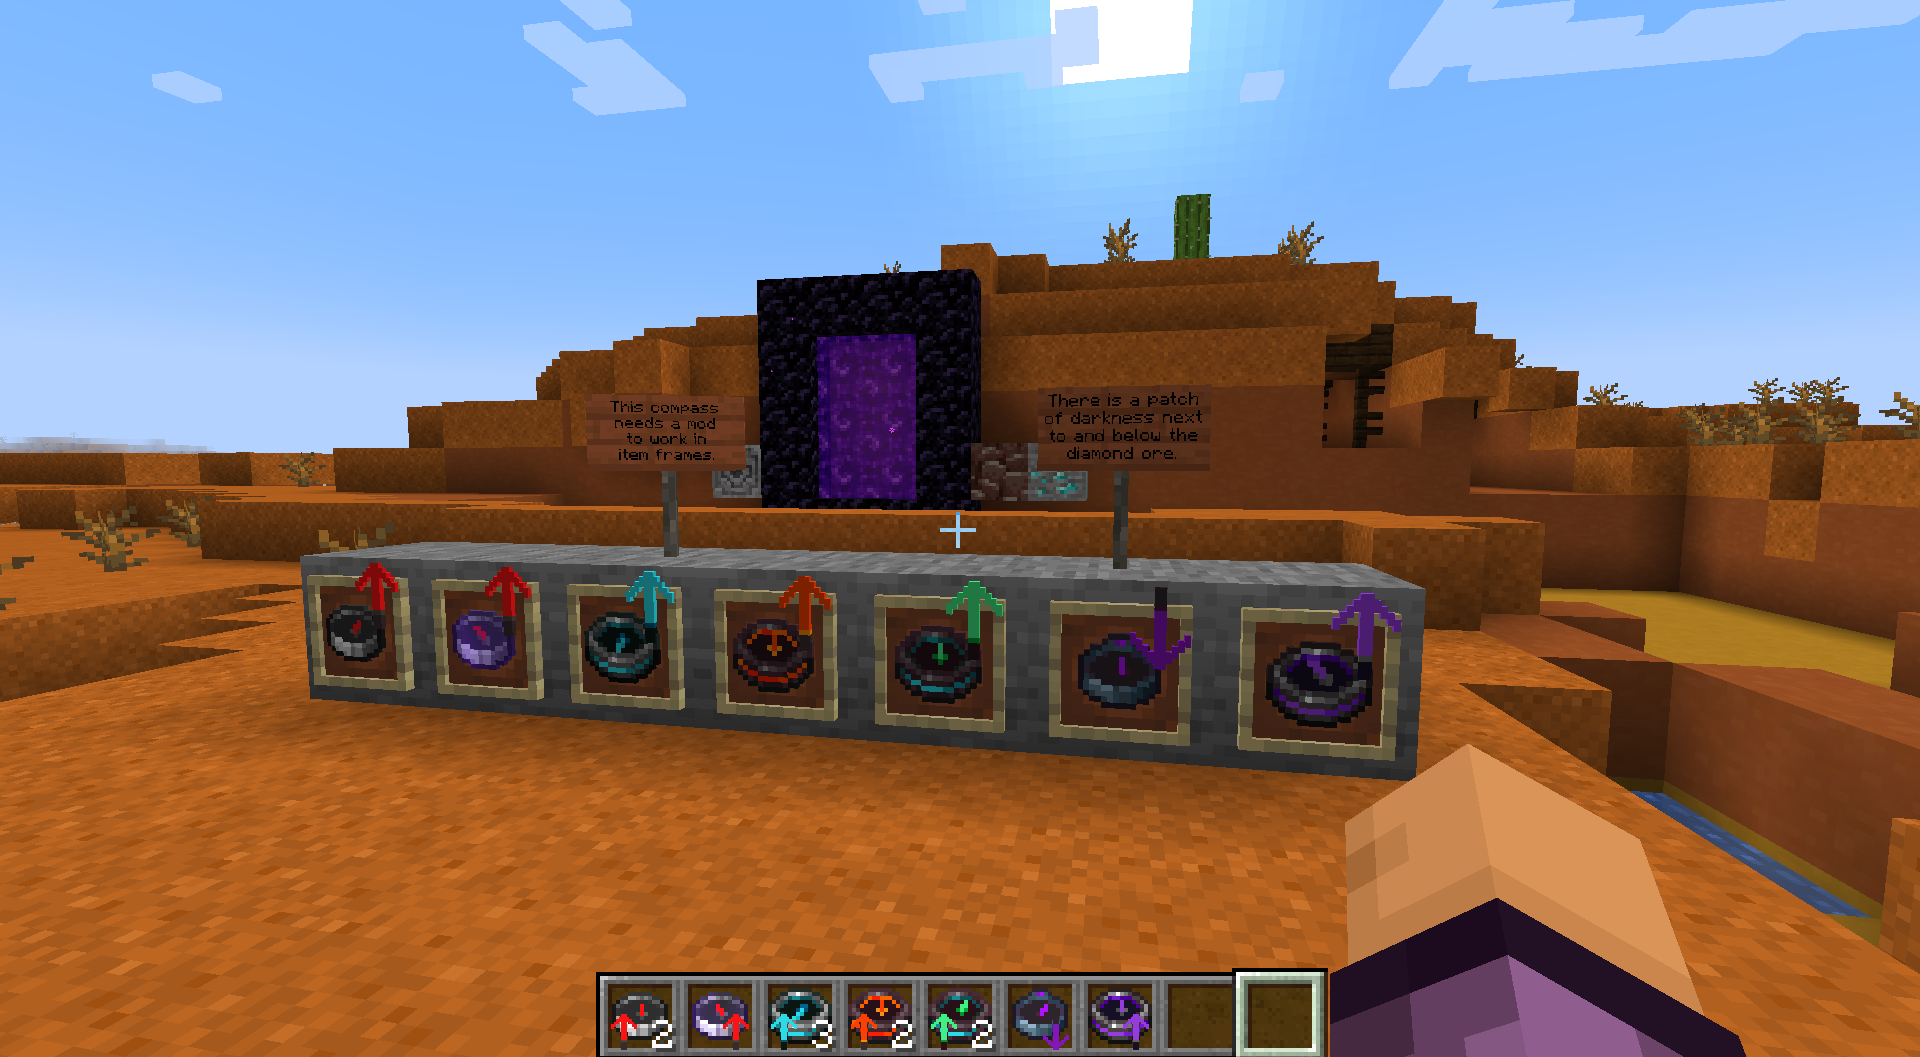 From left to right, Compass, Lodestone Compass, Recovery Compass (doesn't work in frames*), Netherite Compass, Miner's Compass, Dark Compass, and Portal Linking Compass. 

*Works in frames in v2.1.0 if you have another mod installed.